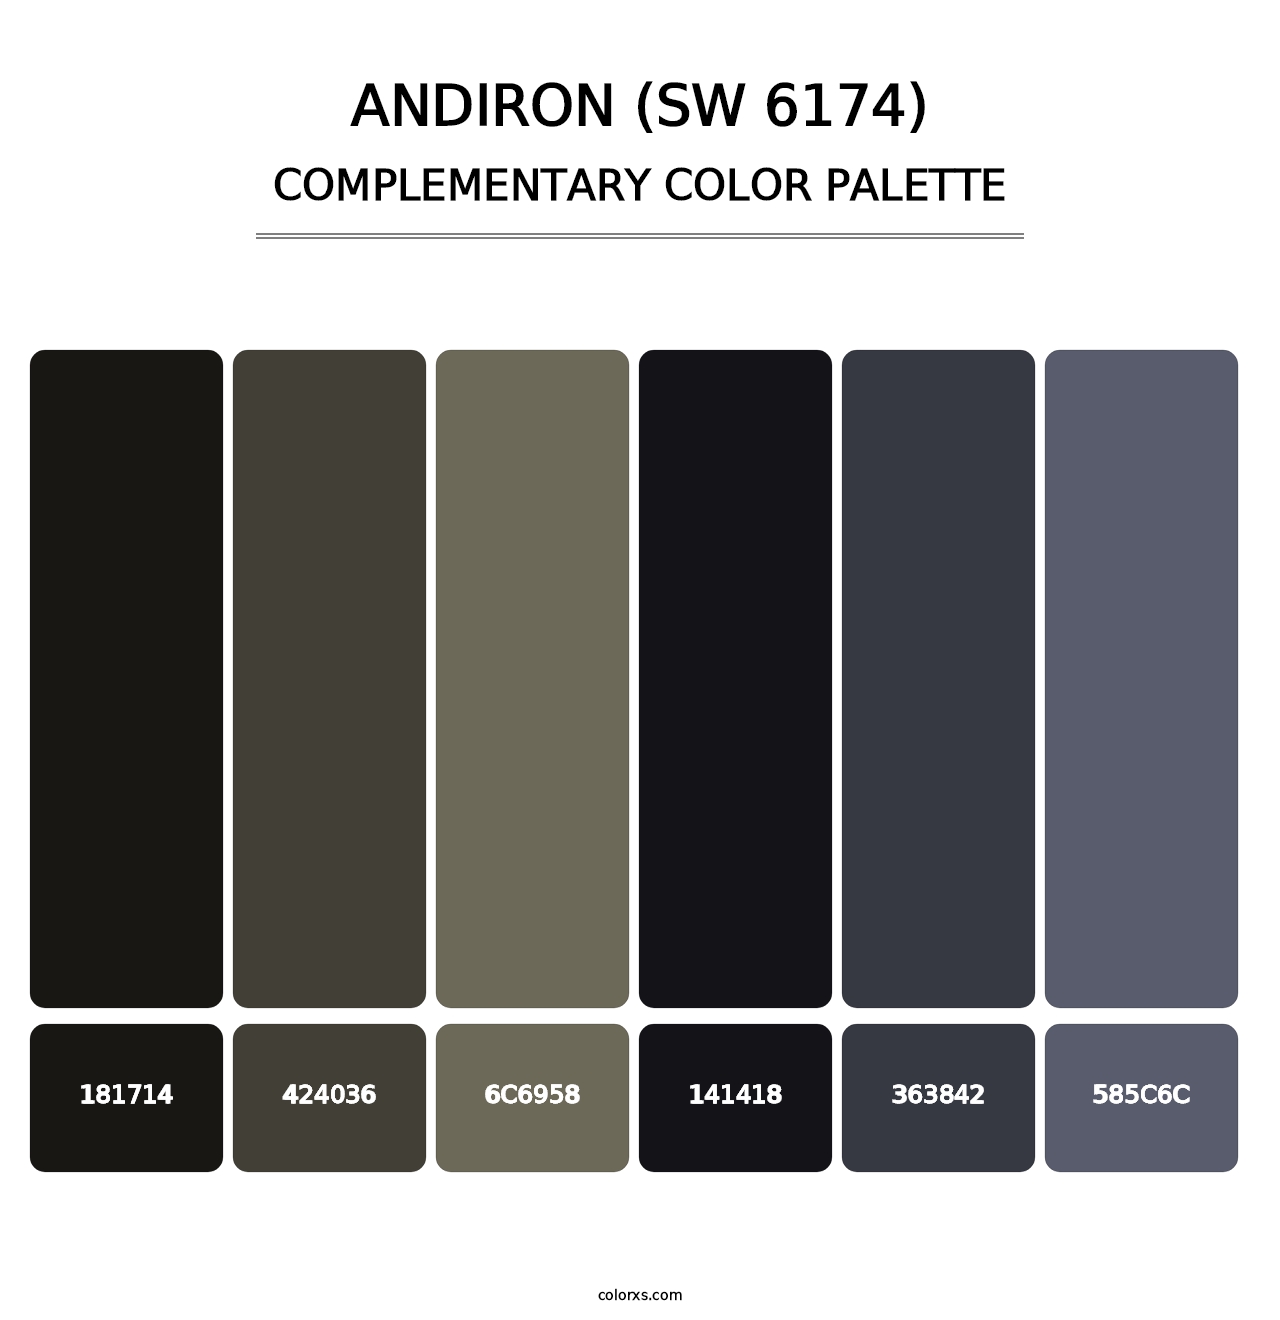 Andiron (SW 6174) - Complementary Color Palette